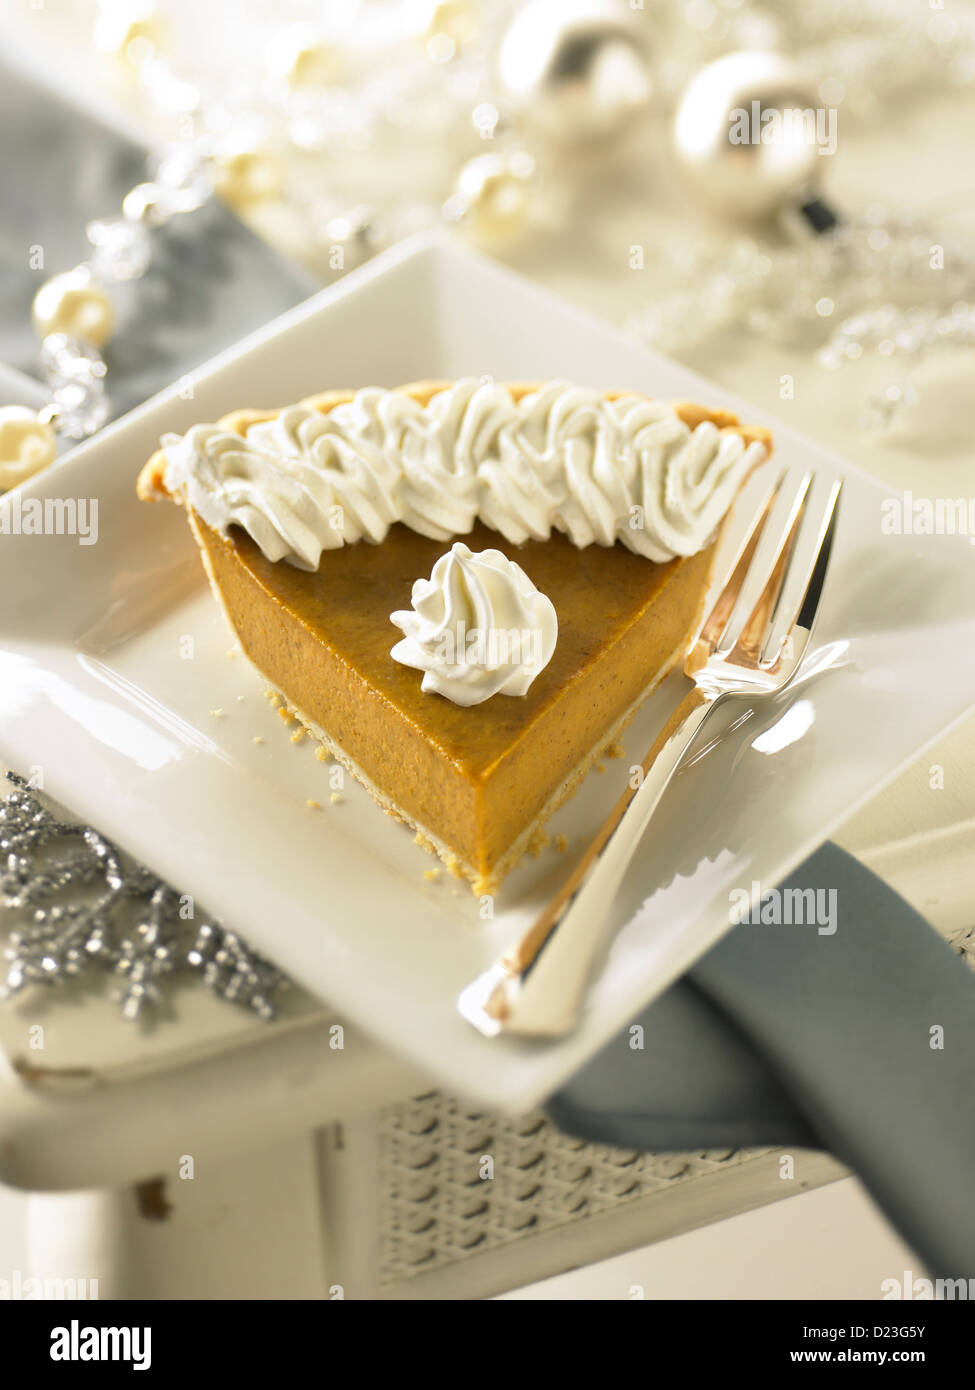 Pumpkin pie slice in a holiday setting Stock Photo